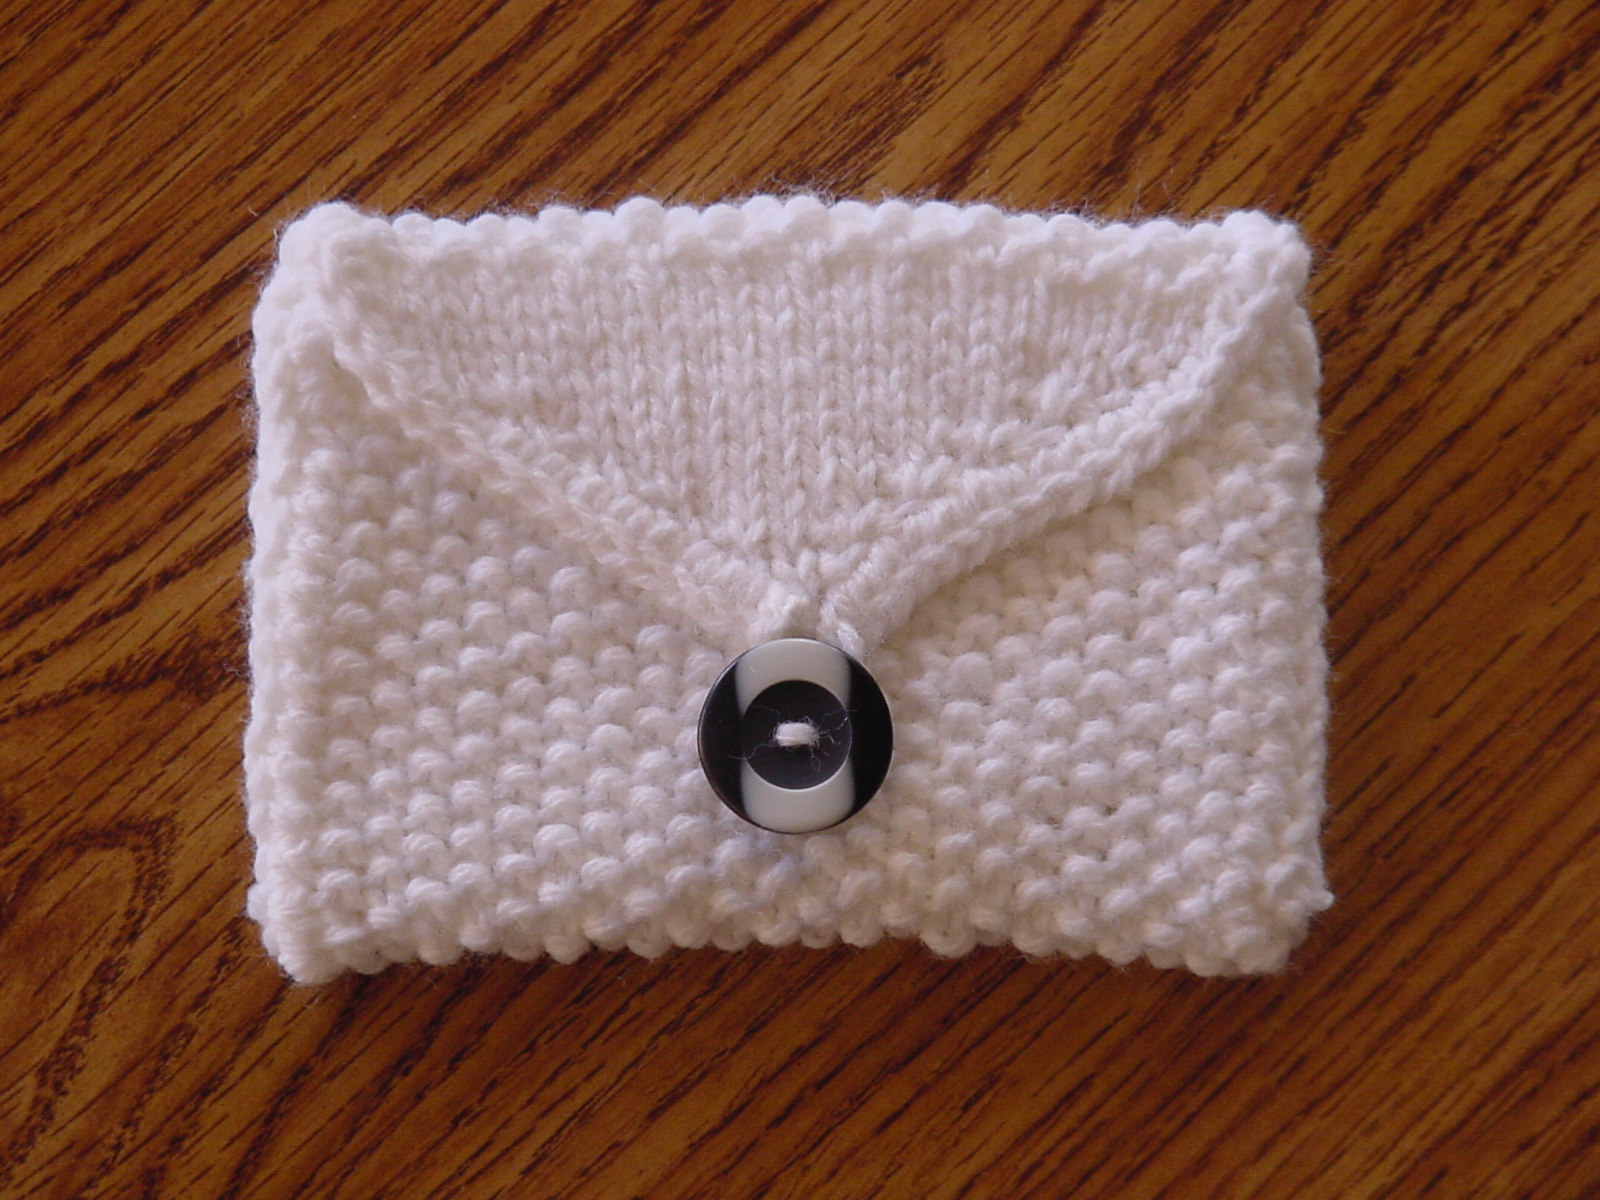 Knitted gift pouch - August 2009